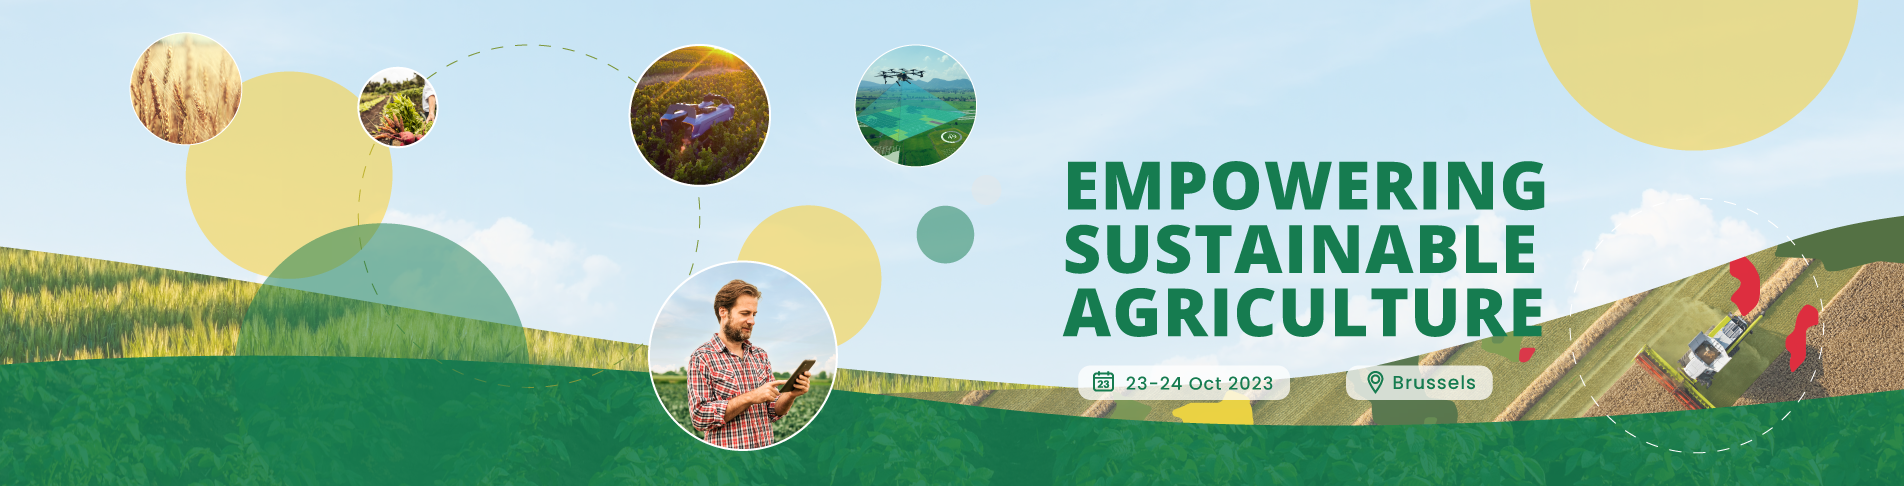 CEMA Summit 2023: Empowering Sustainable Agriculture